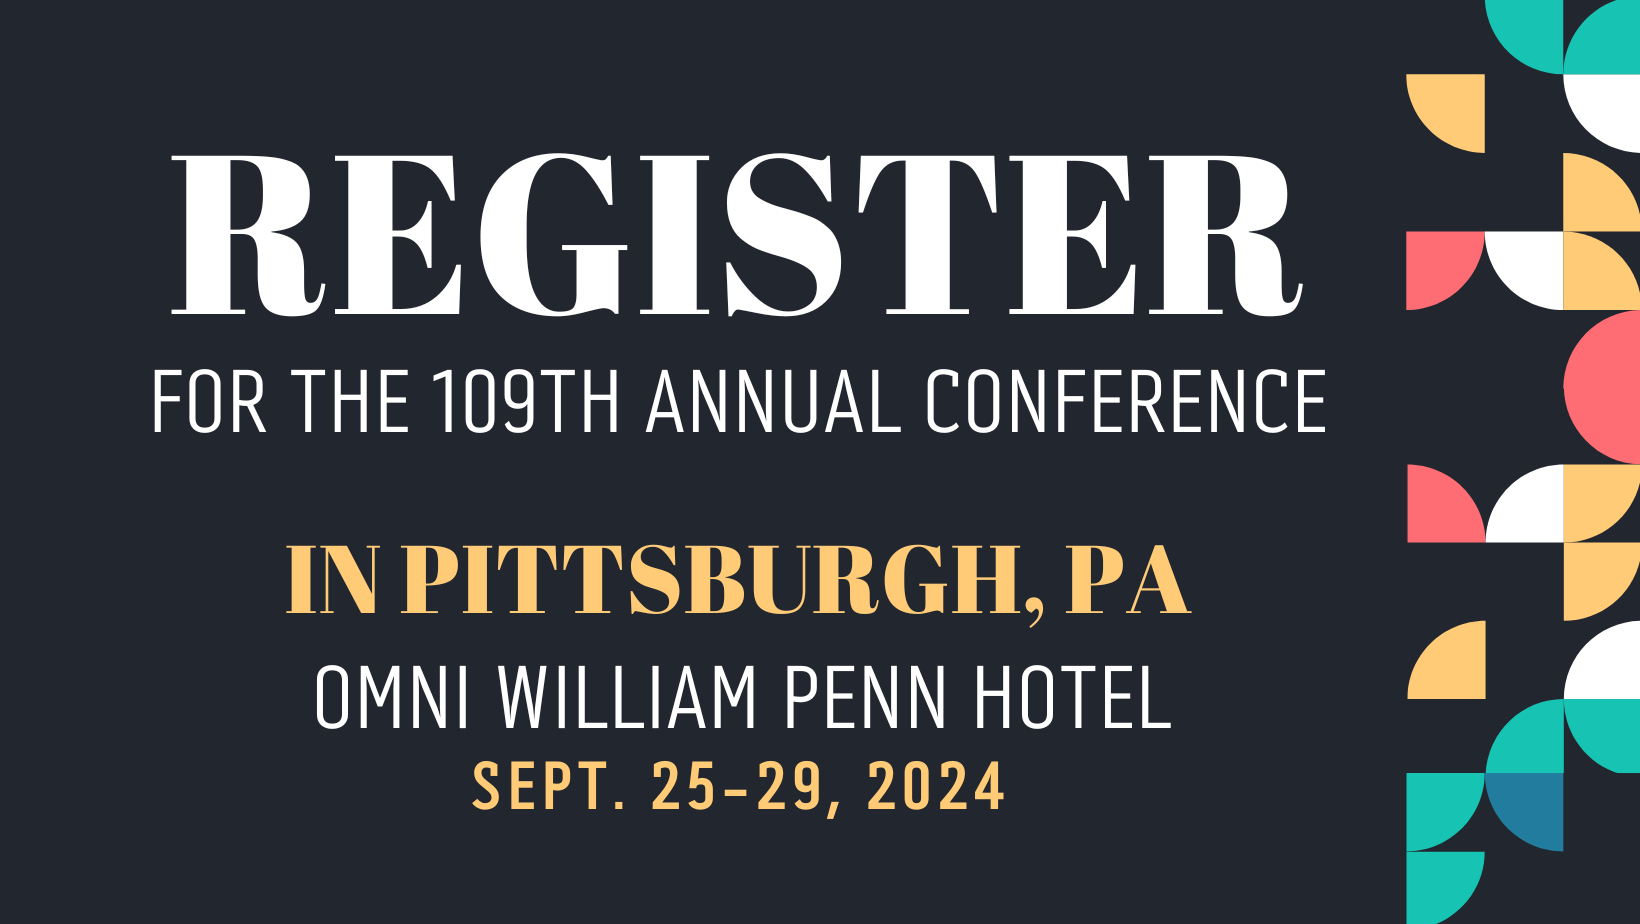 Register for THE 109th Annual Conference in Pittsburgh, PA. Omni William Penn Hotel, Sept. 25-29, 2024